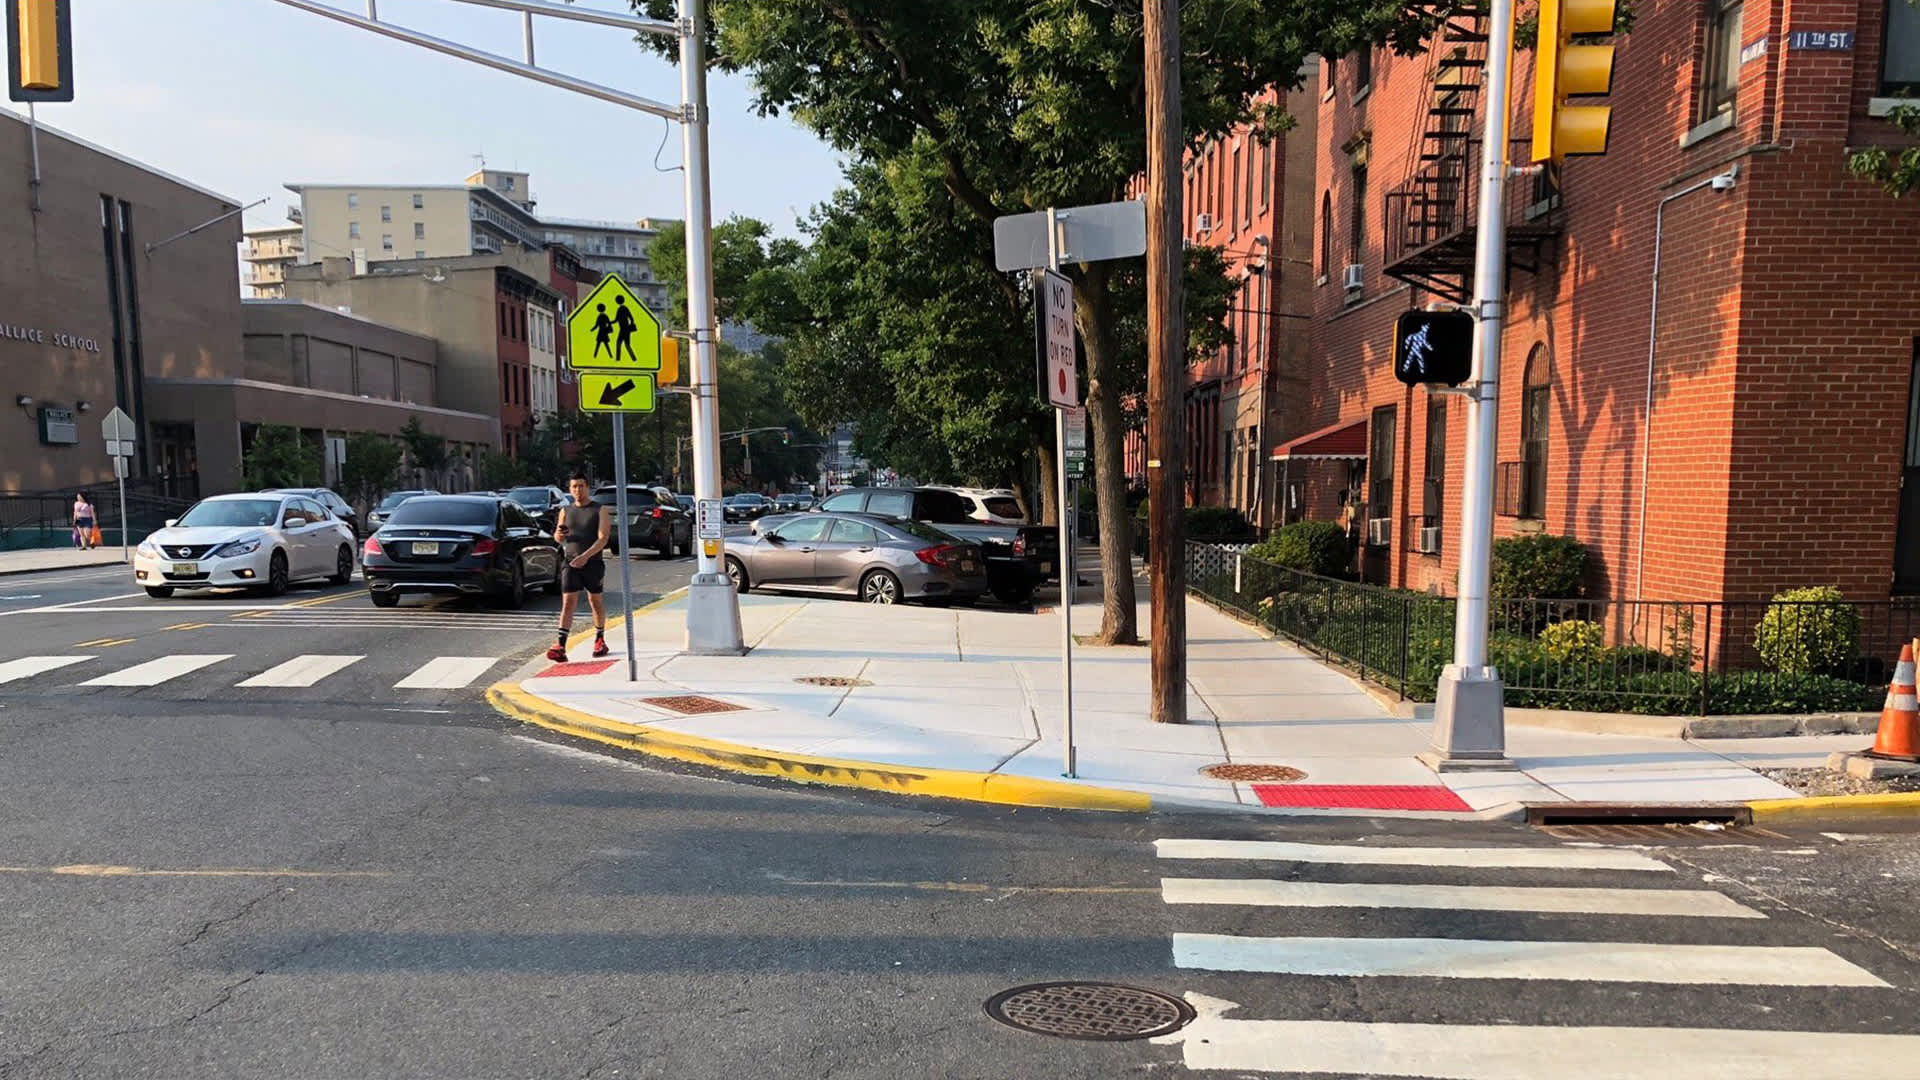 Installation of Vision Zero upgrades at 11th Street and Willow Avenue to increase pedestrian visibility and reduce conflicts between turning vehicles and pedestrians crossing the street.(Image credit: City of Hoboken)